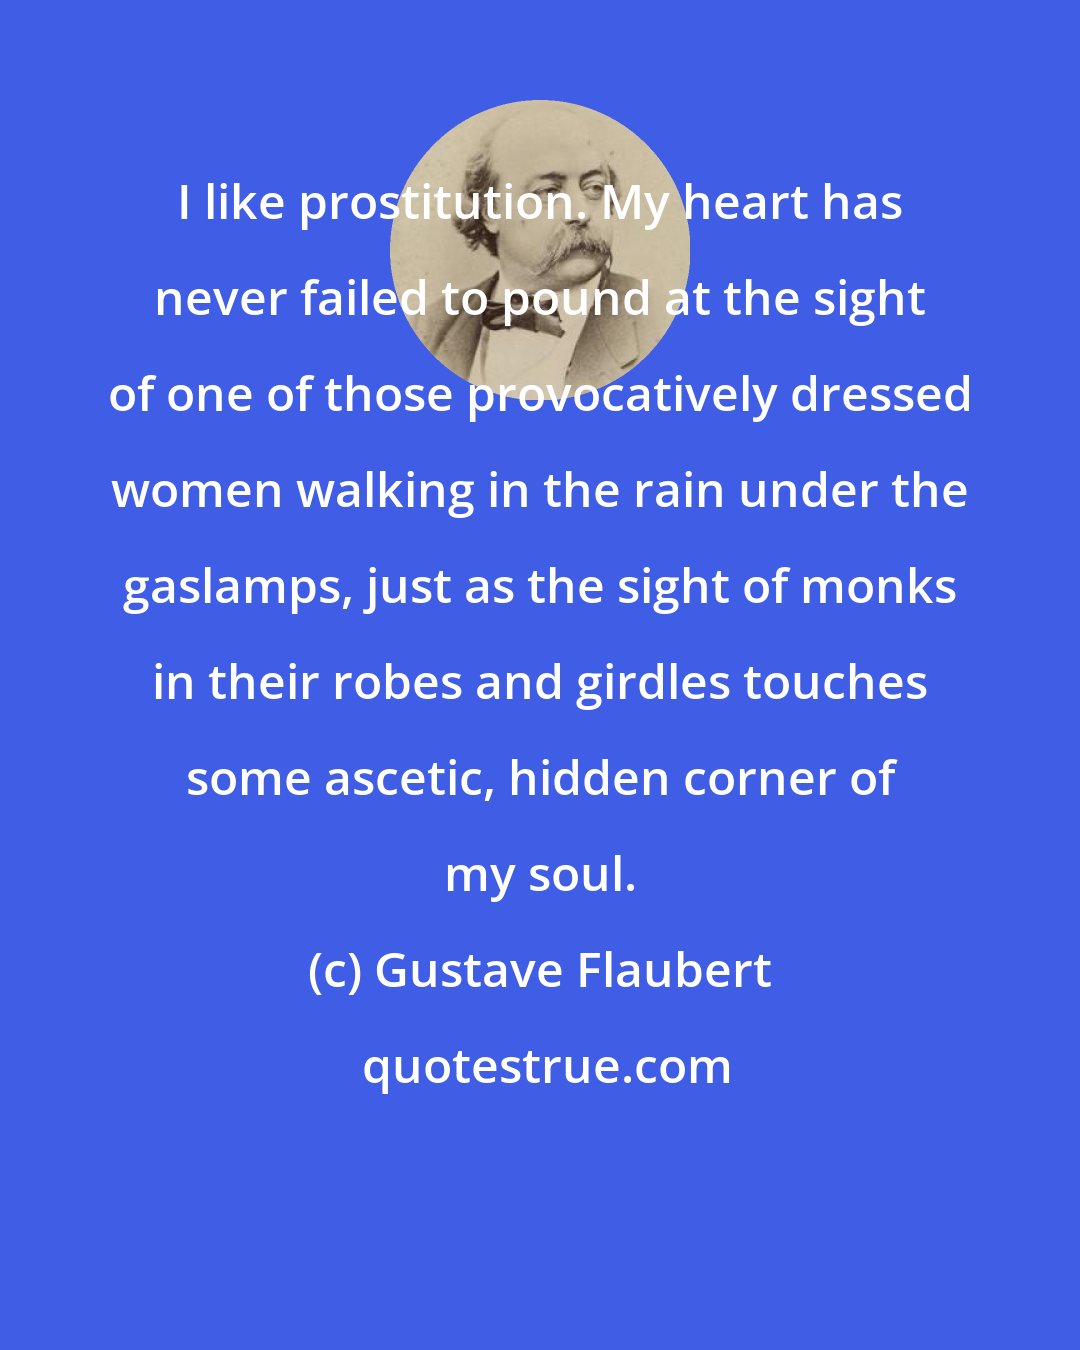 Gustave Flaubert: I like prostitution. My heart has never failed to pound at the sight of one of those provocatively dressed women walking in the rain under the gaslamps, just as the sight of monks in their robes and girdles touches some ascetic, hidden corner of my soul.